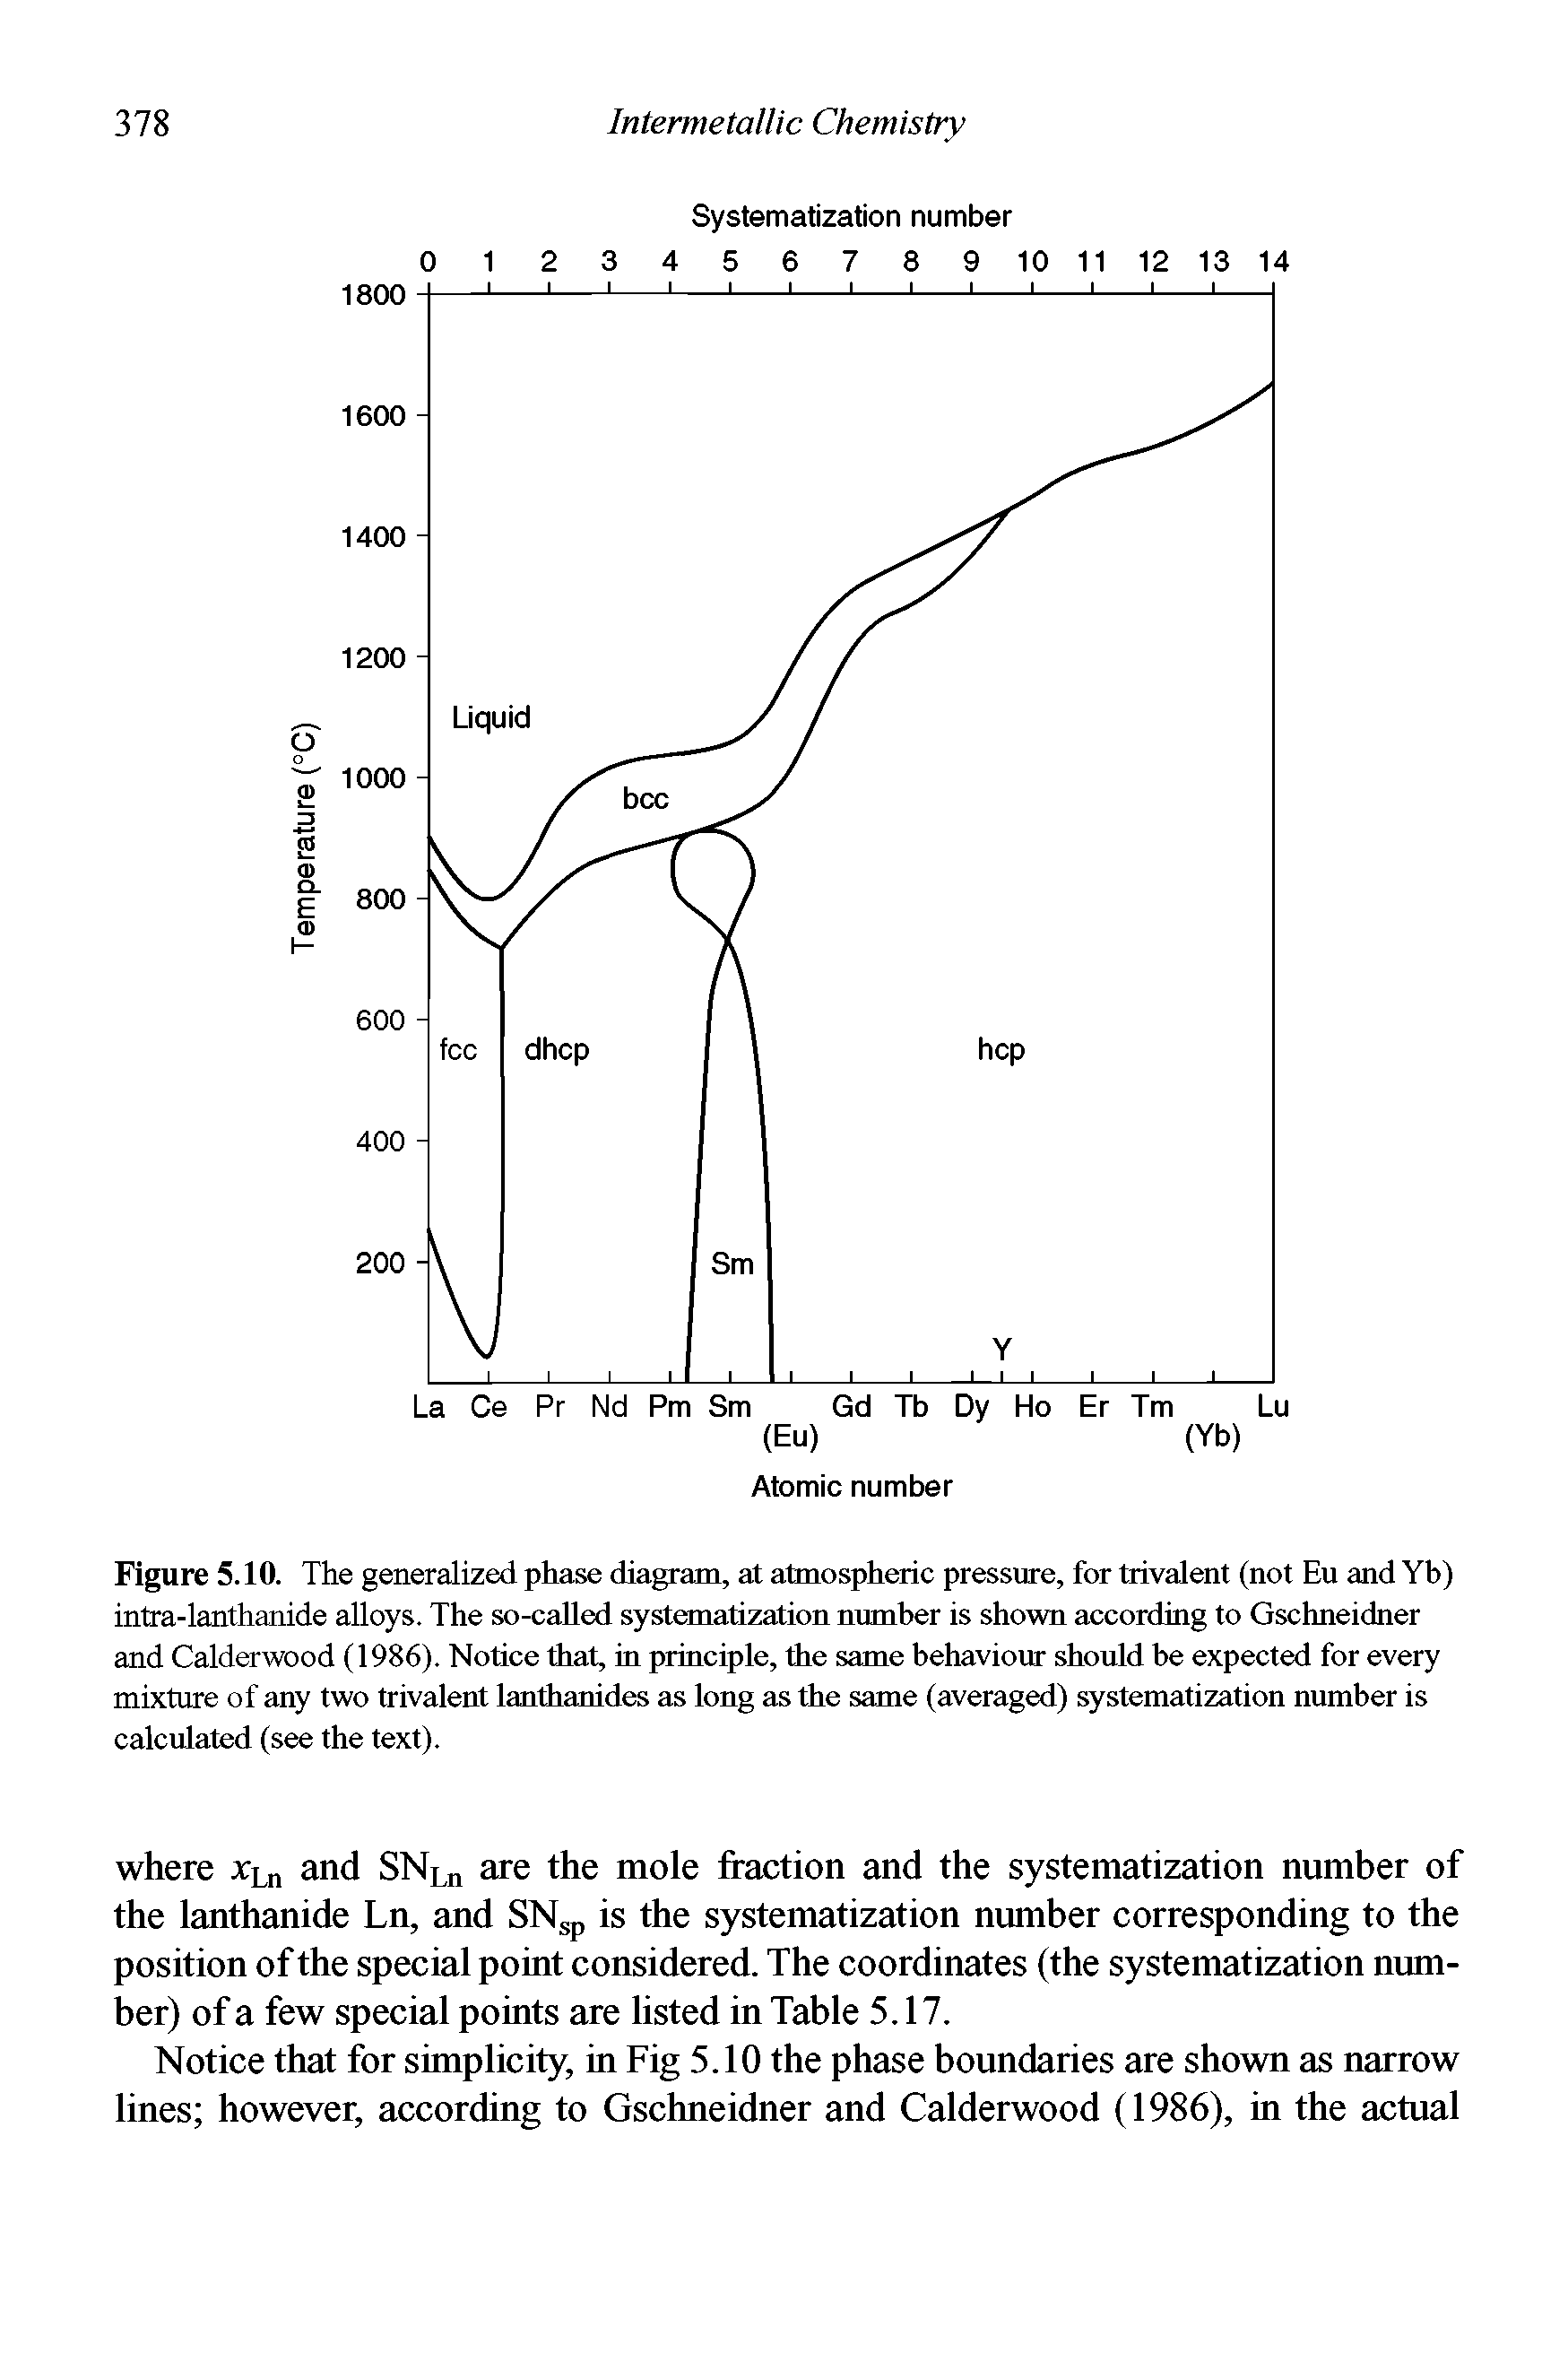 Figure 5.10. The generalized phase diagram, at atmospheric pressure, for trivalent (not Eu and Yb) intra-lanthanide alloys. The so-called systematization number is shown according to Gschneidner and Calderwood (1986). Notice that, in principle, the same behaviour should be expected for every mixture of any two trivalent lanthanides as long as the same (averaged) systematization number is calculated (see the text).